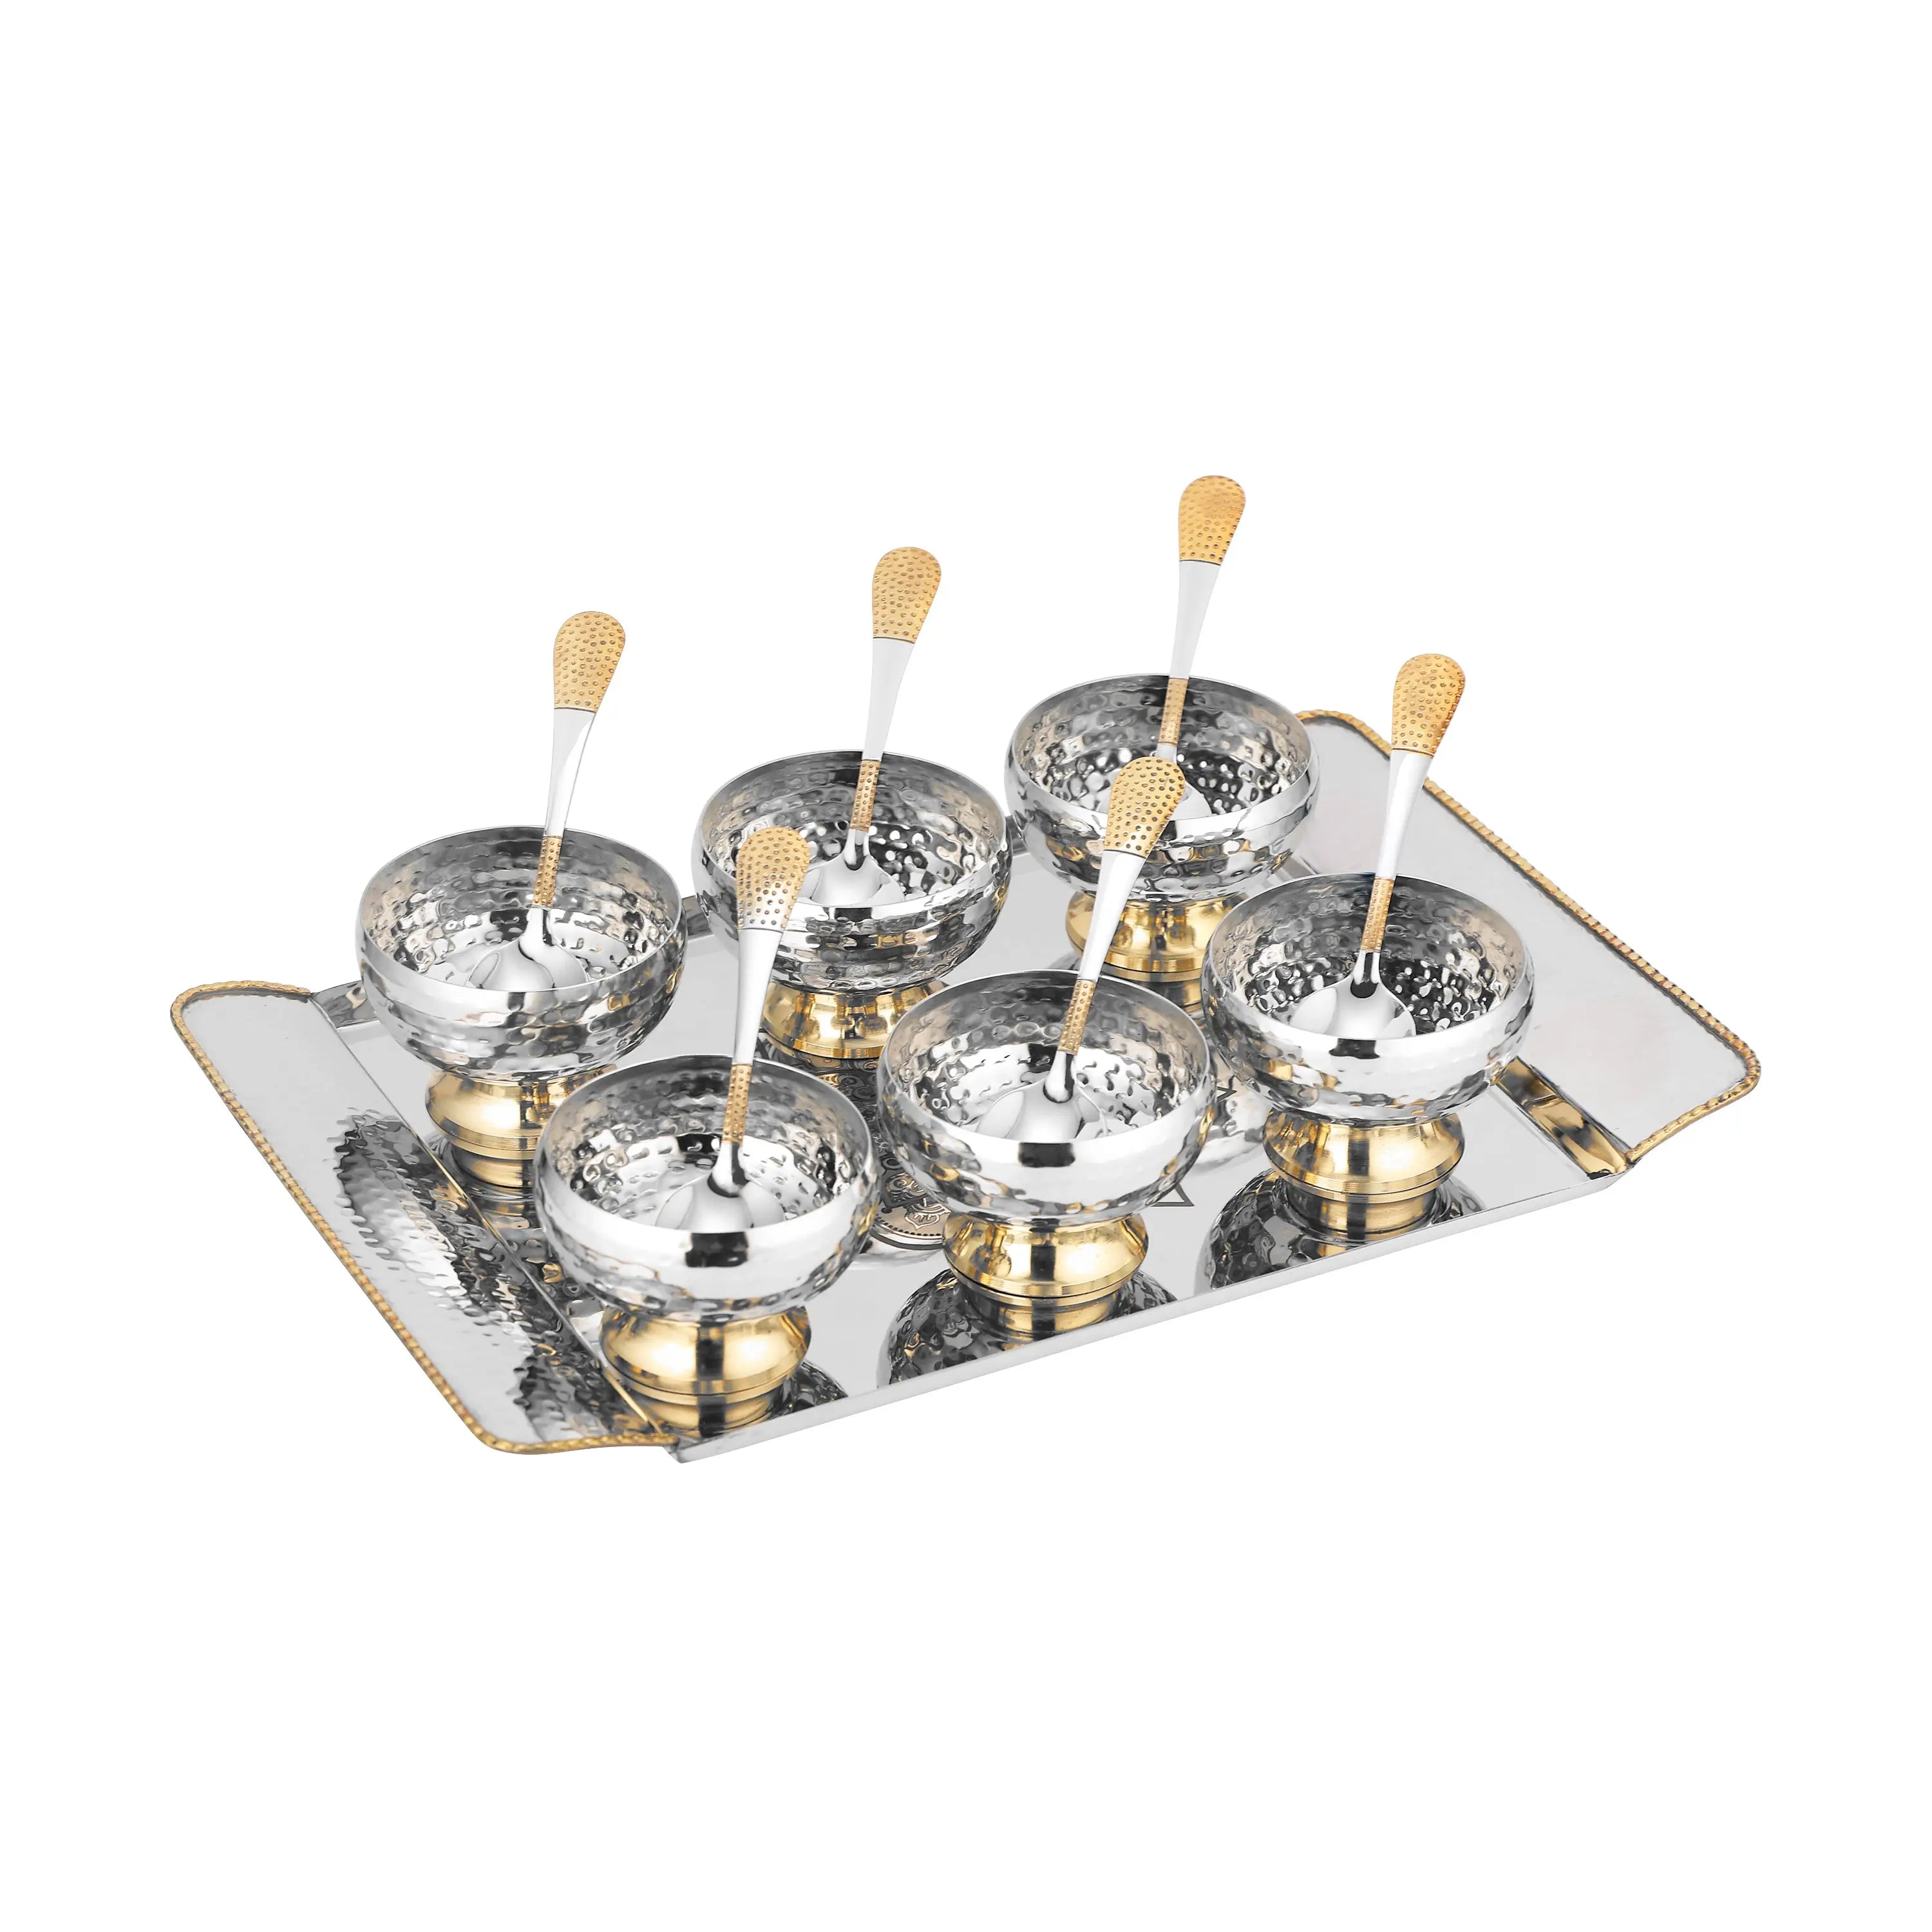 STAINLESS STEEL ICE CREAM SET WITH TRAY & SPOON TWO TONE - CROCKERY WALA AND COMPANY 